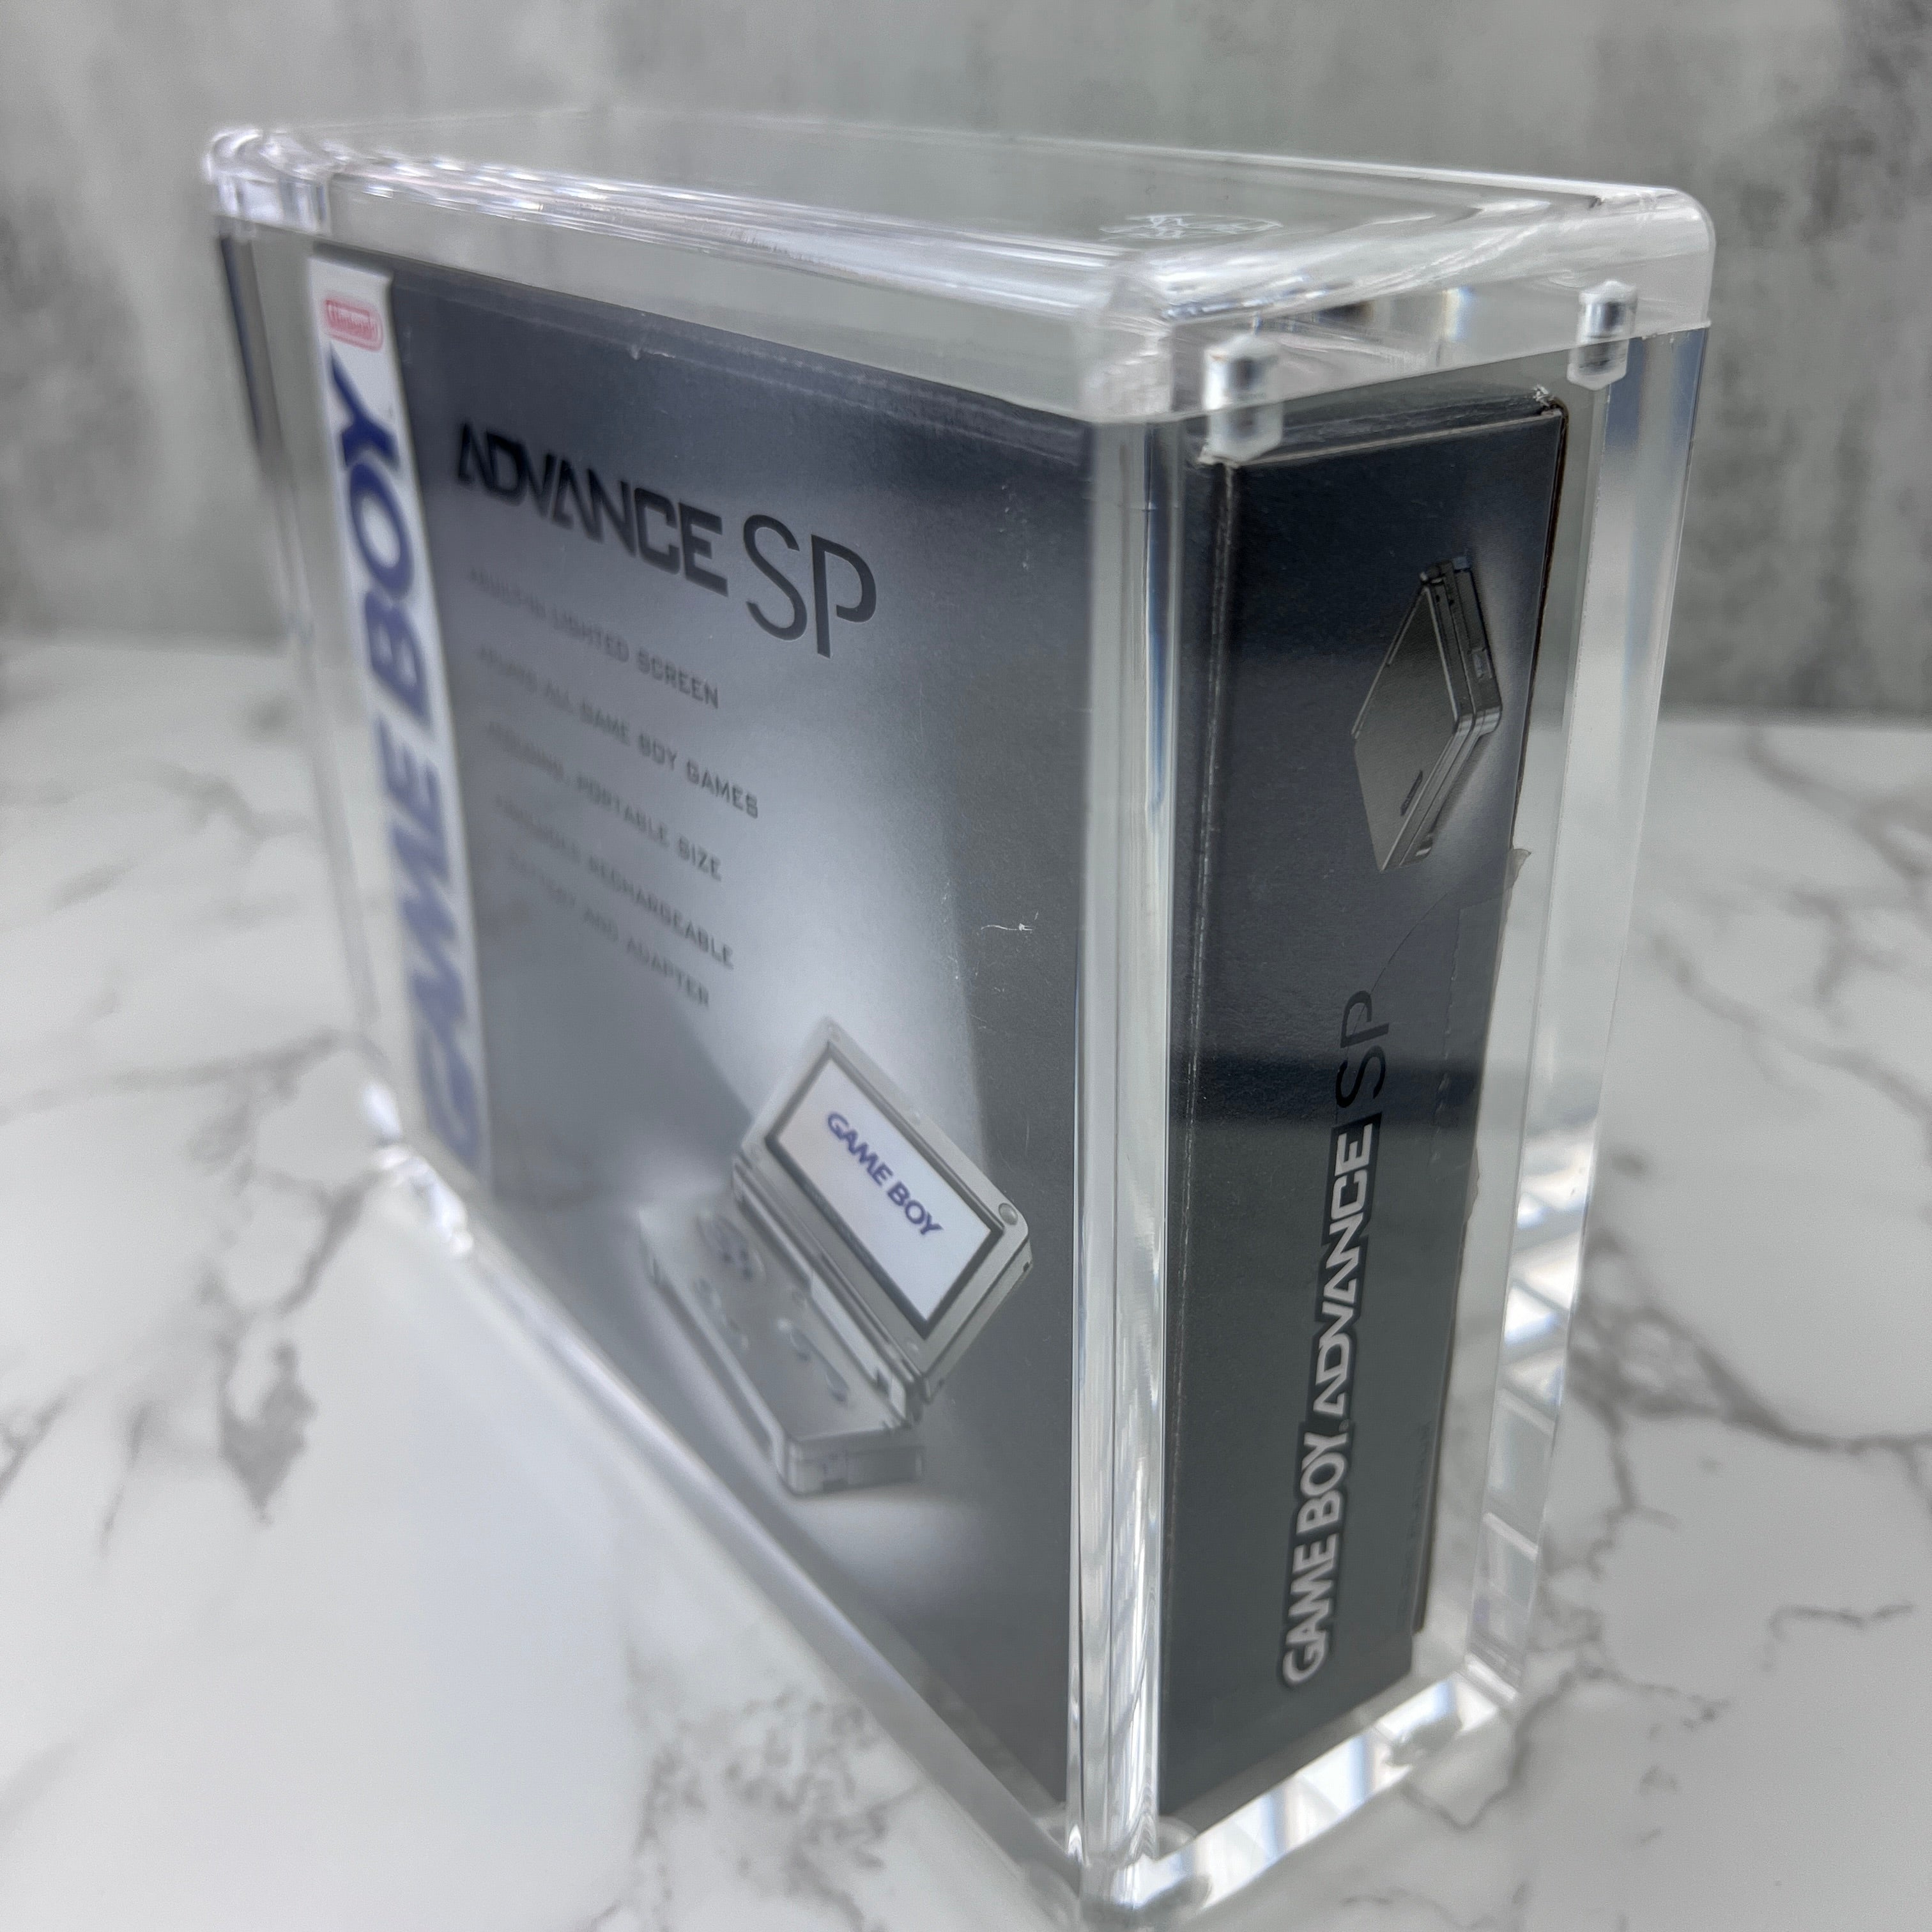 Gameboy Advance SP acrylic display cases are custom designed with strong neodymium magnets, UV resistant coating, maximum transparency and thick walls for years of heavy, trustworthy protection.